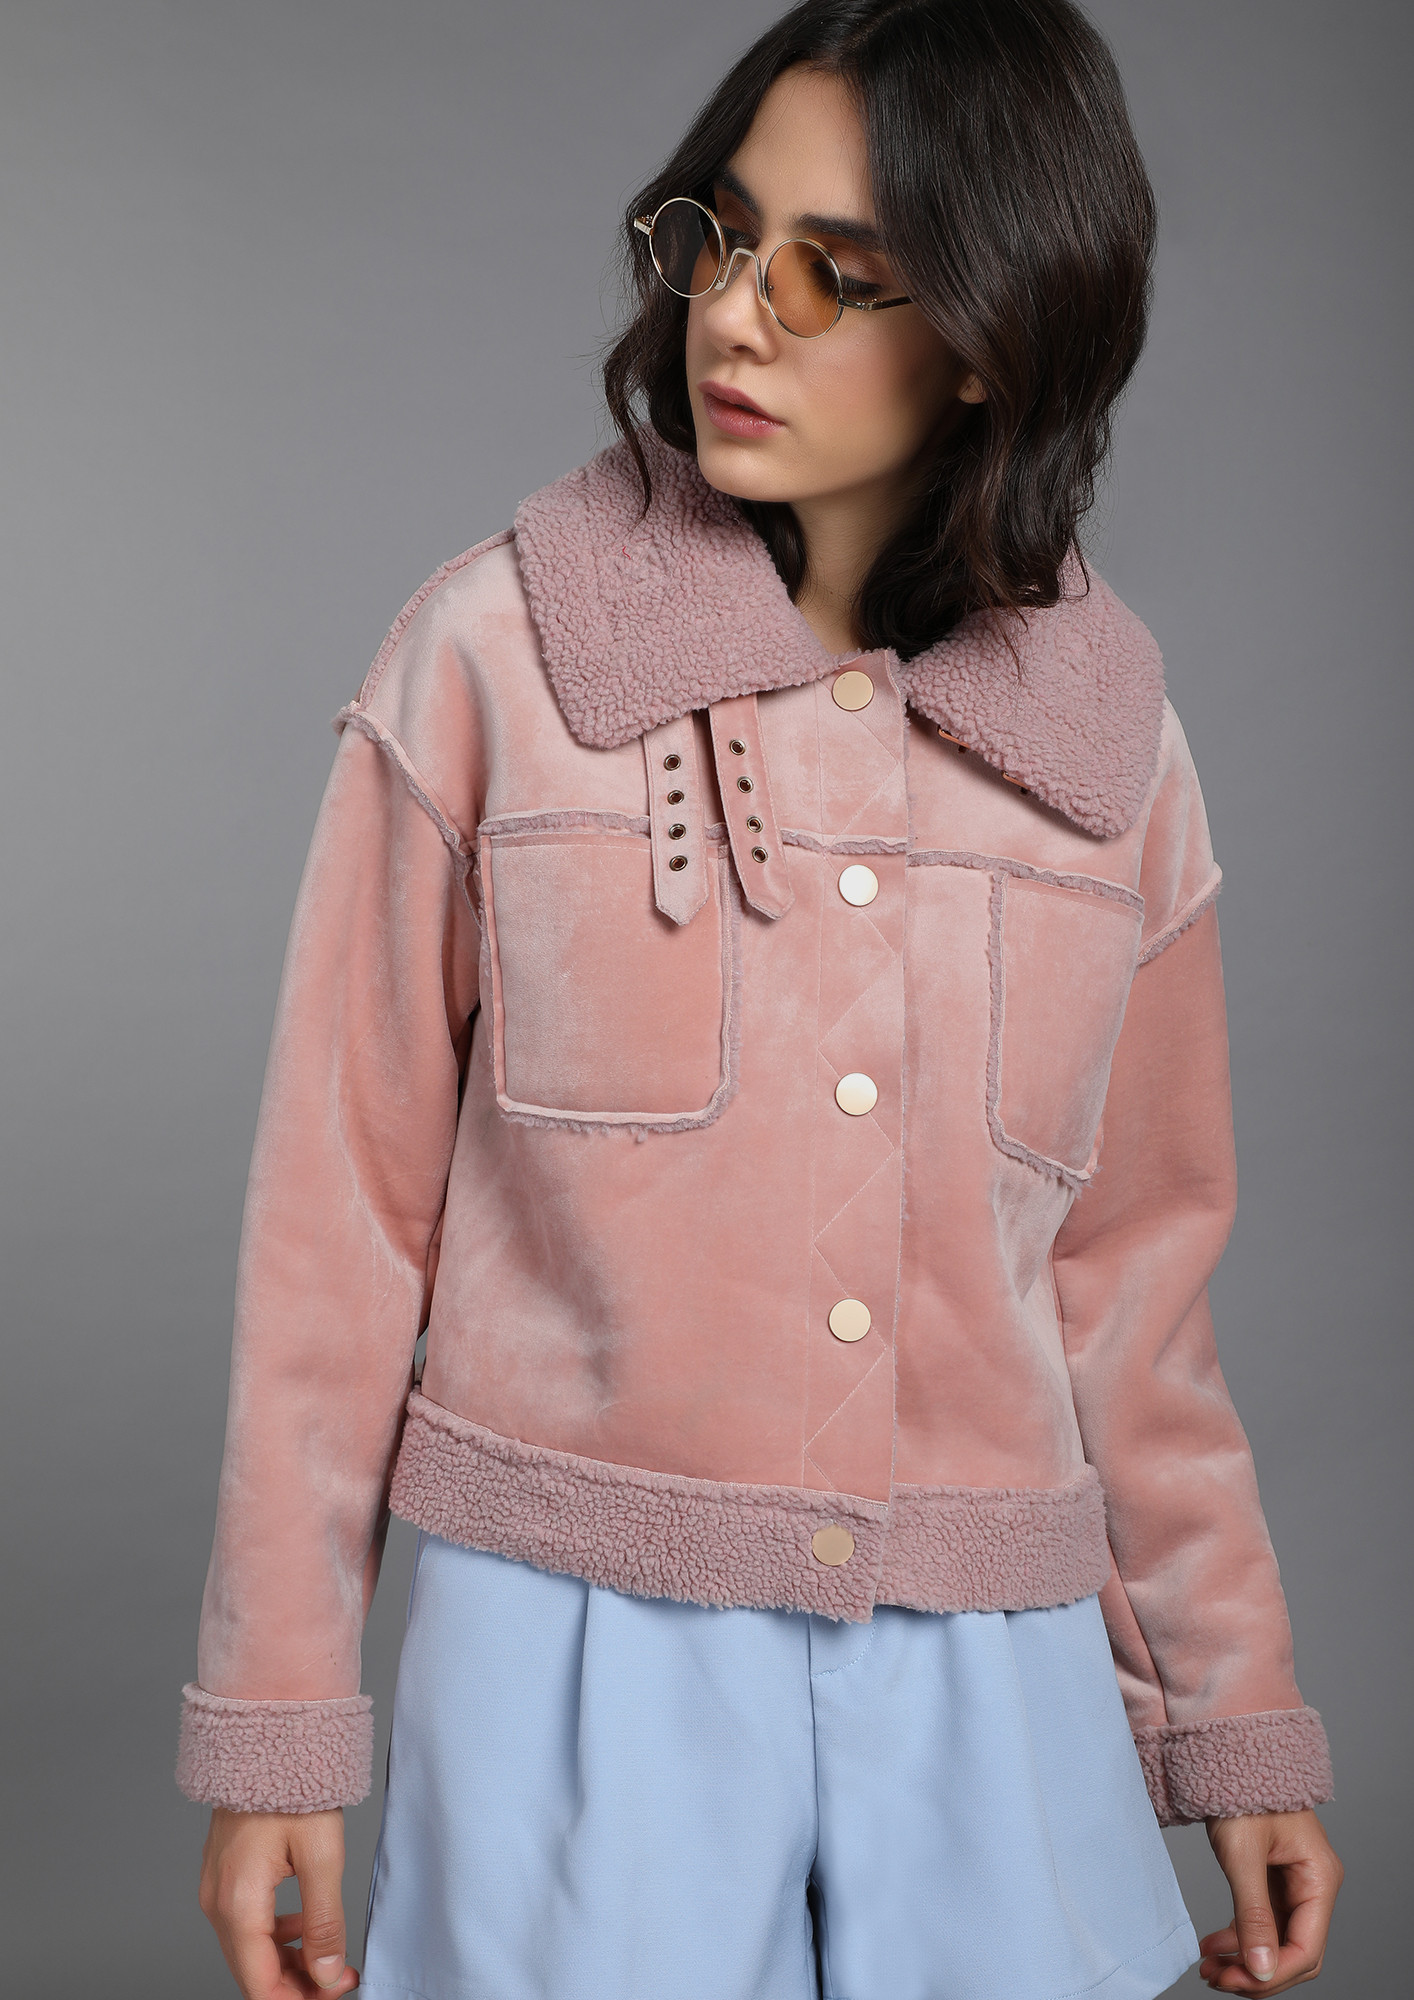 BRING IT ON BUTTON PINK CROPPED JACKET